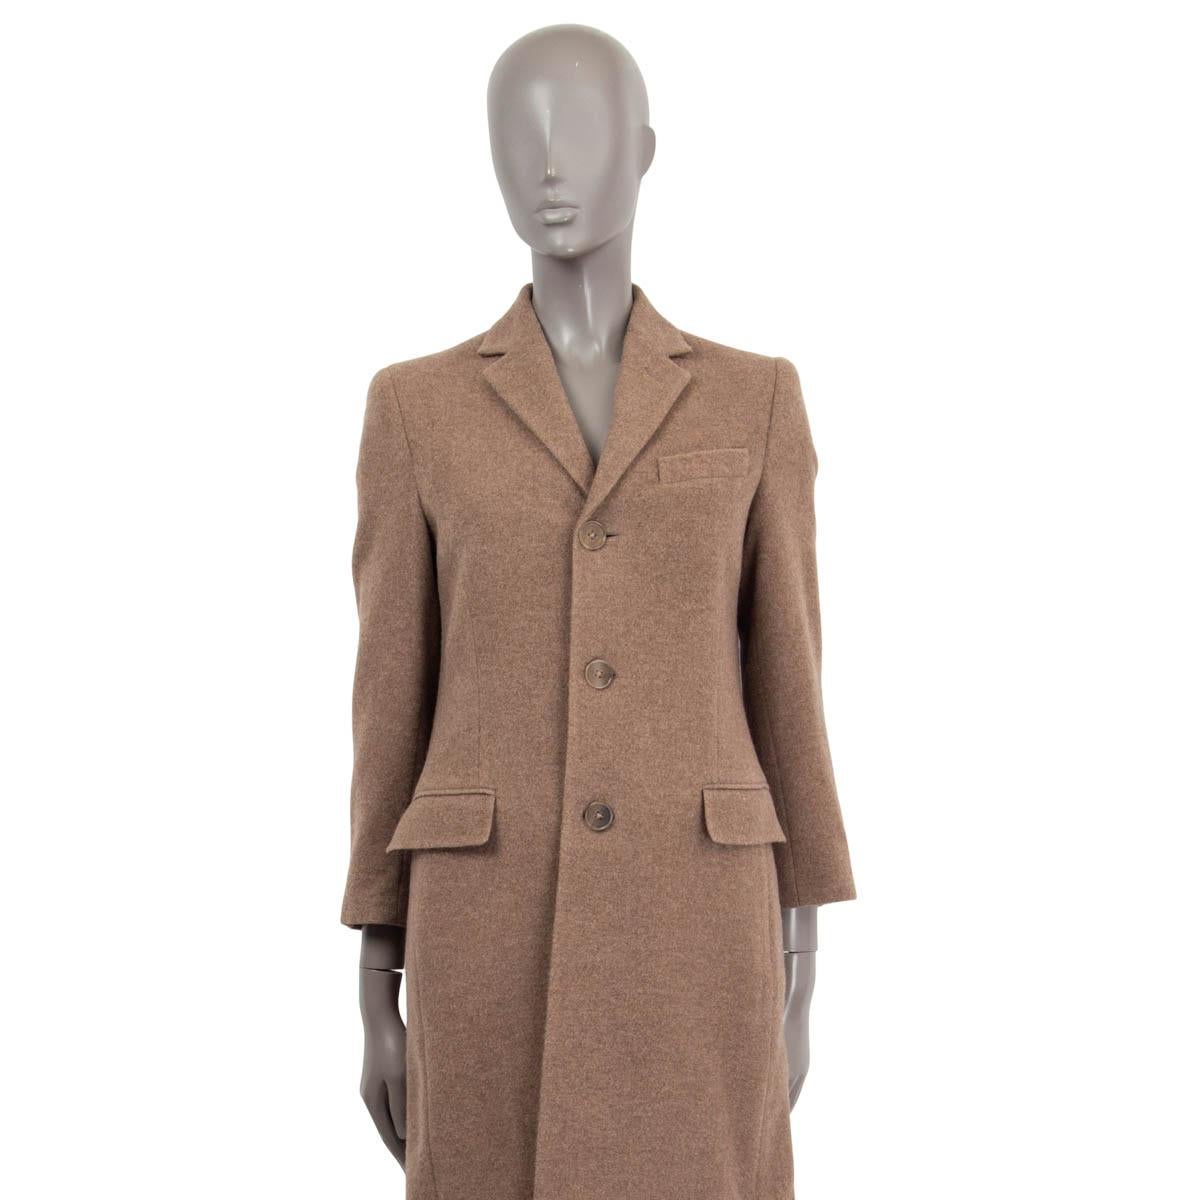 100% authentic Ralph Laurent single breasted coat in brown cashmere (75%) and wool (25%). Opens with three buttons in the front and features a notch collar, two flap pockets on the front and one slit chest pocket. Unlined. Has been worn and is in